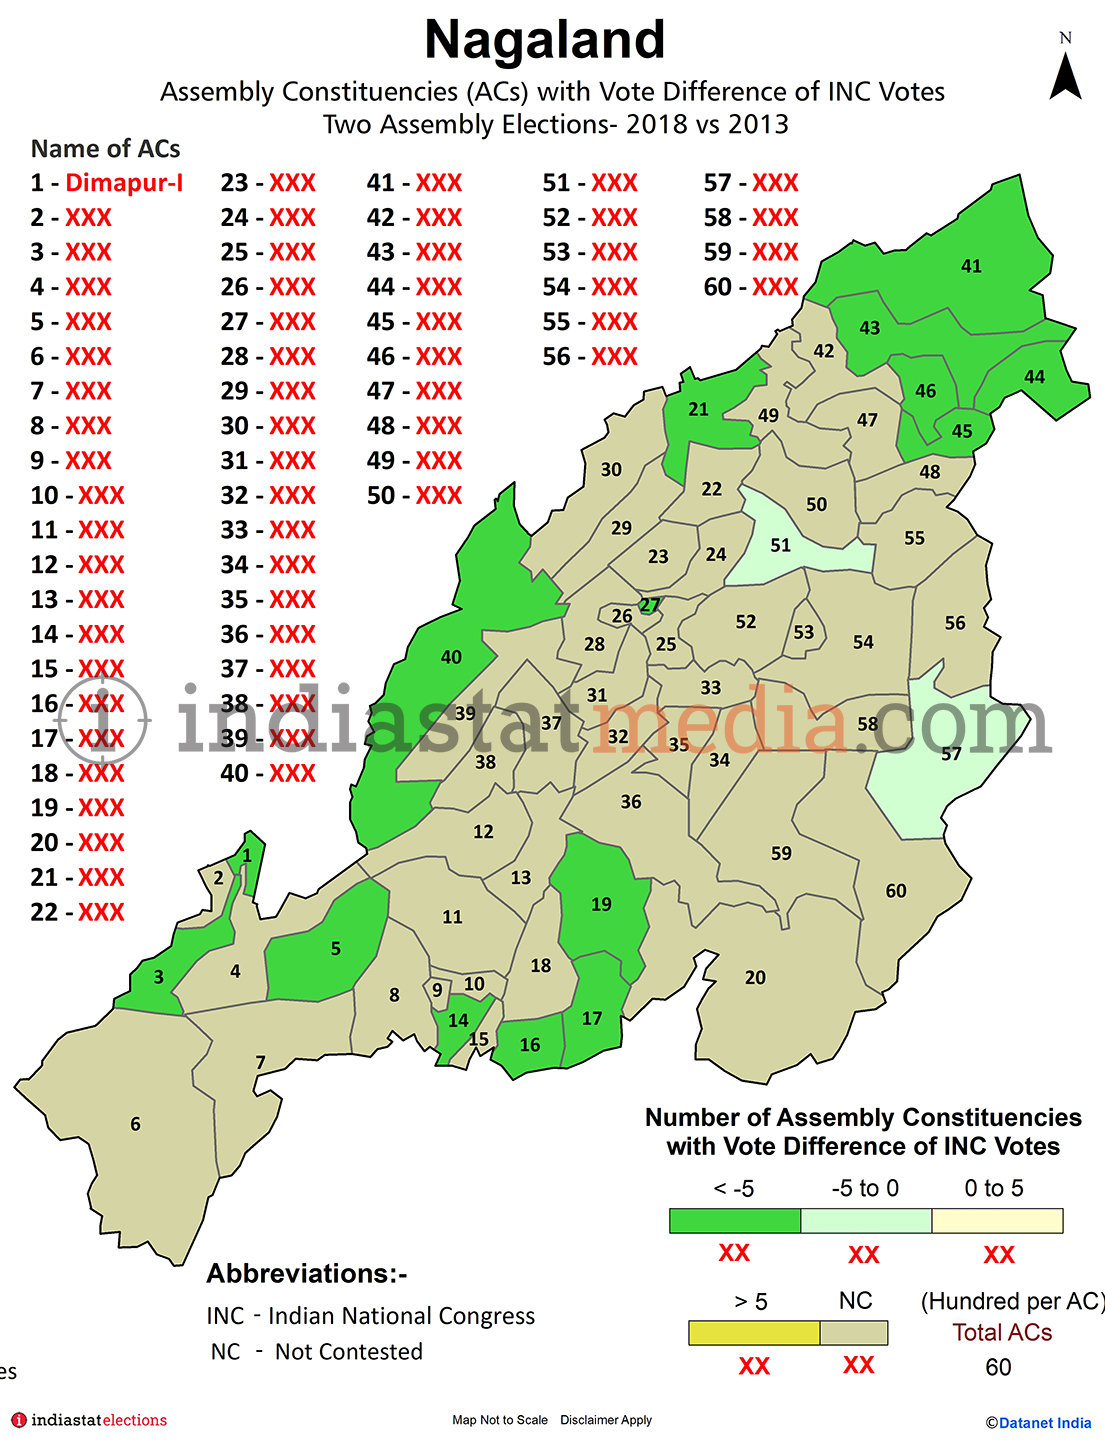 Assembly Constituencies with Vote Difference of INC Votes in Nagaland (Assembly Election - 2013 & 2018)